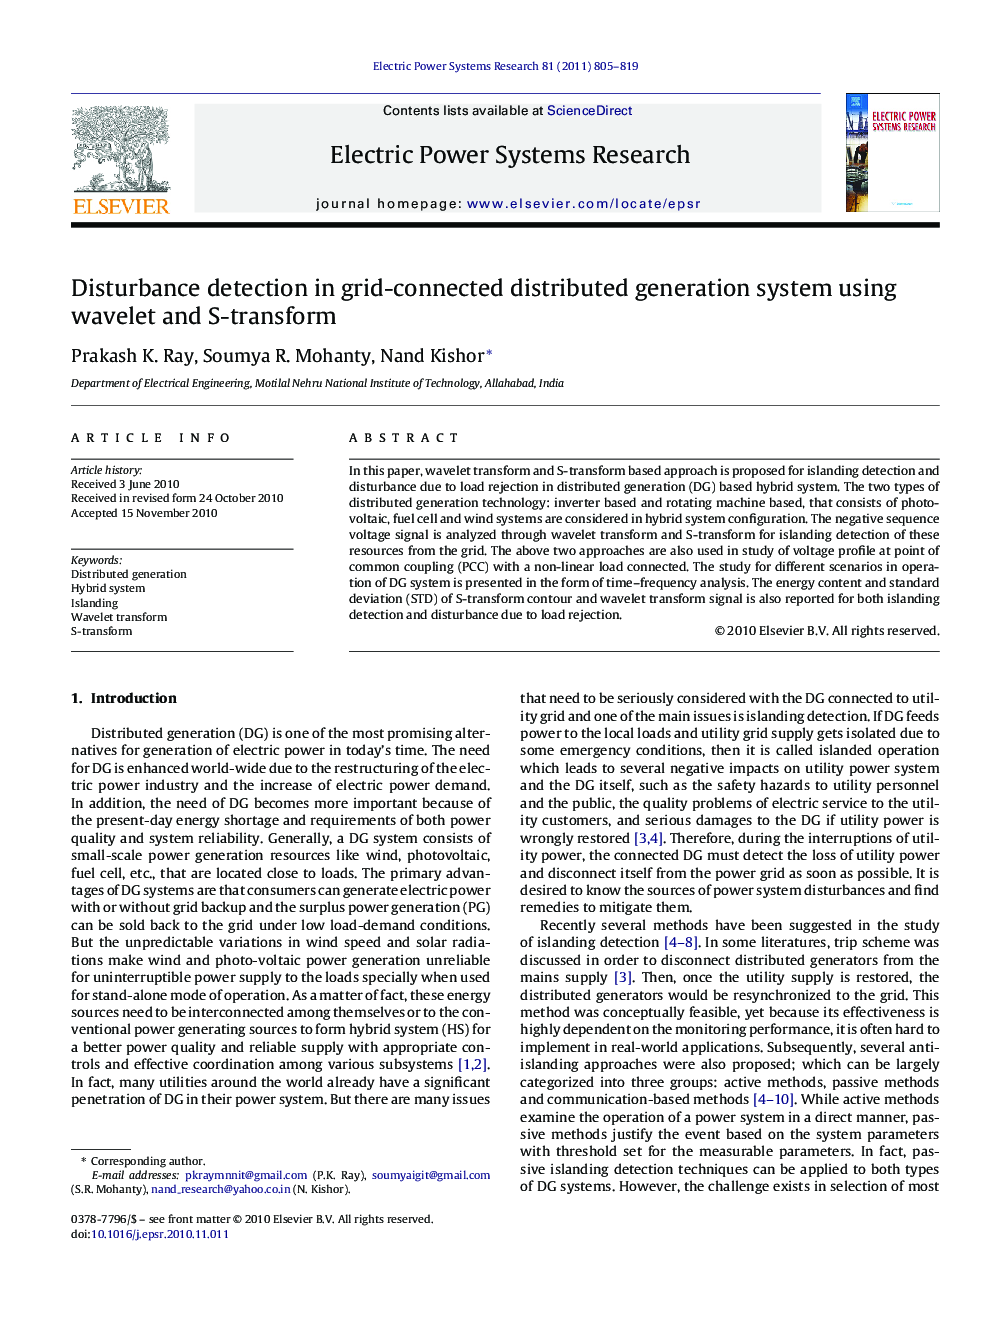 Disturbance detection in grid-connected distributed generation system using wavelet and S-transform